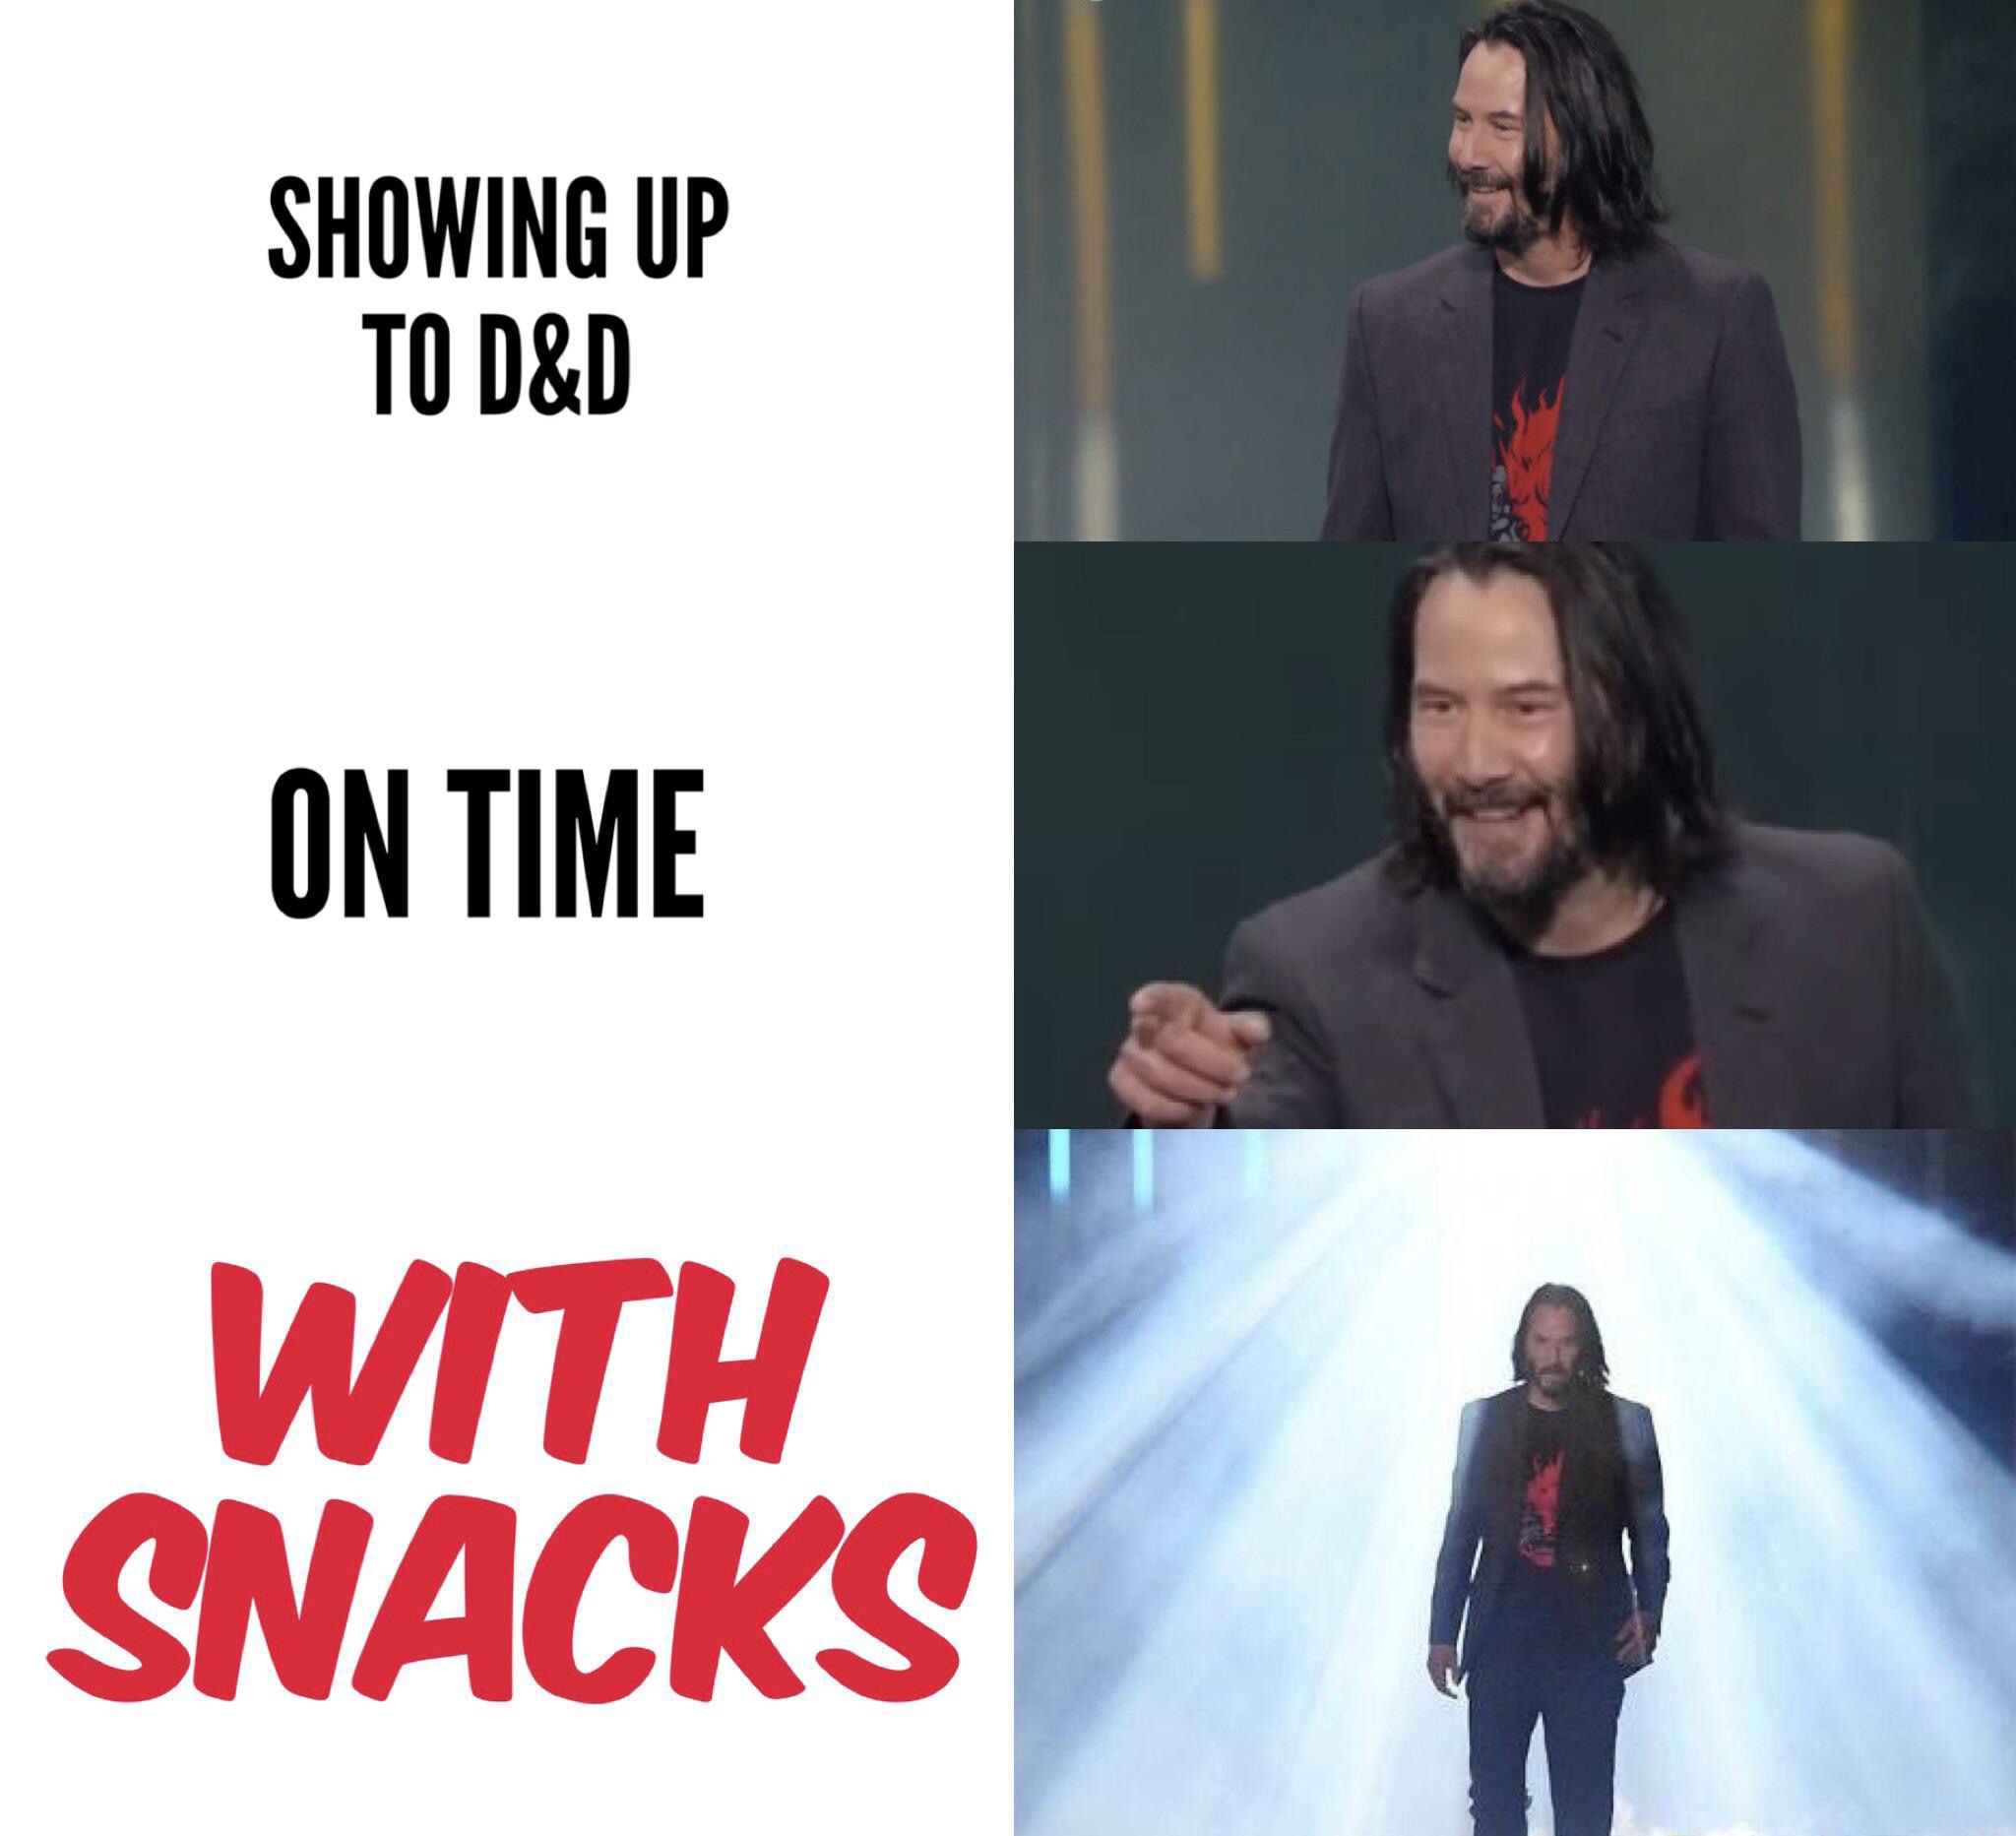 we are back - Showing Up To D&D On Time With Snacks